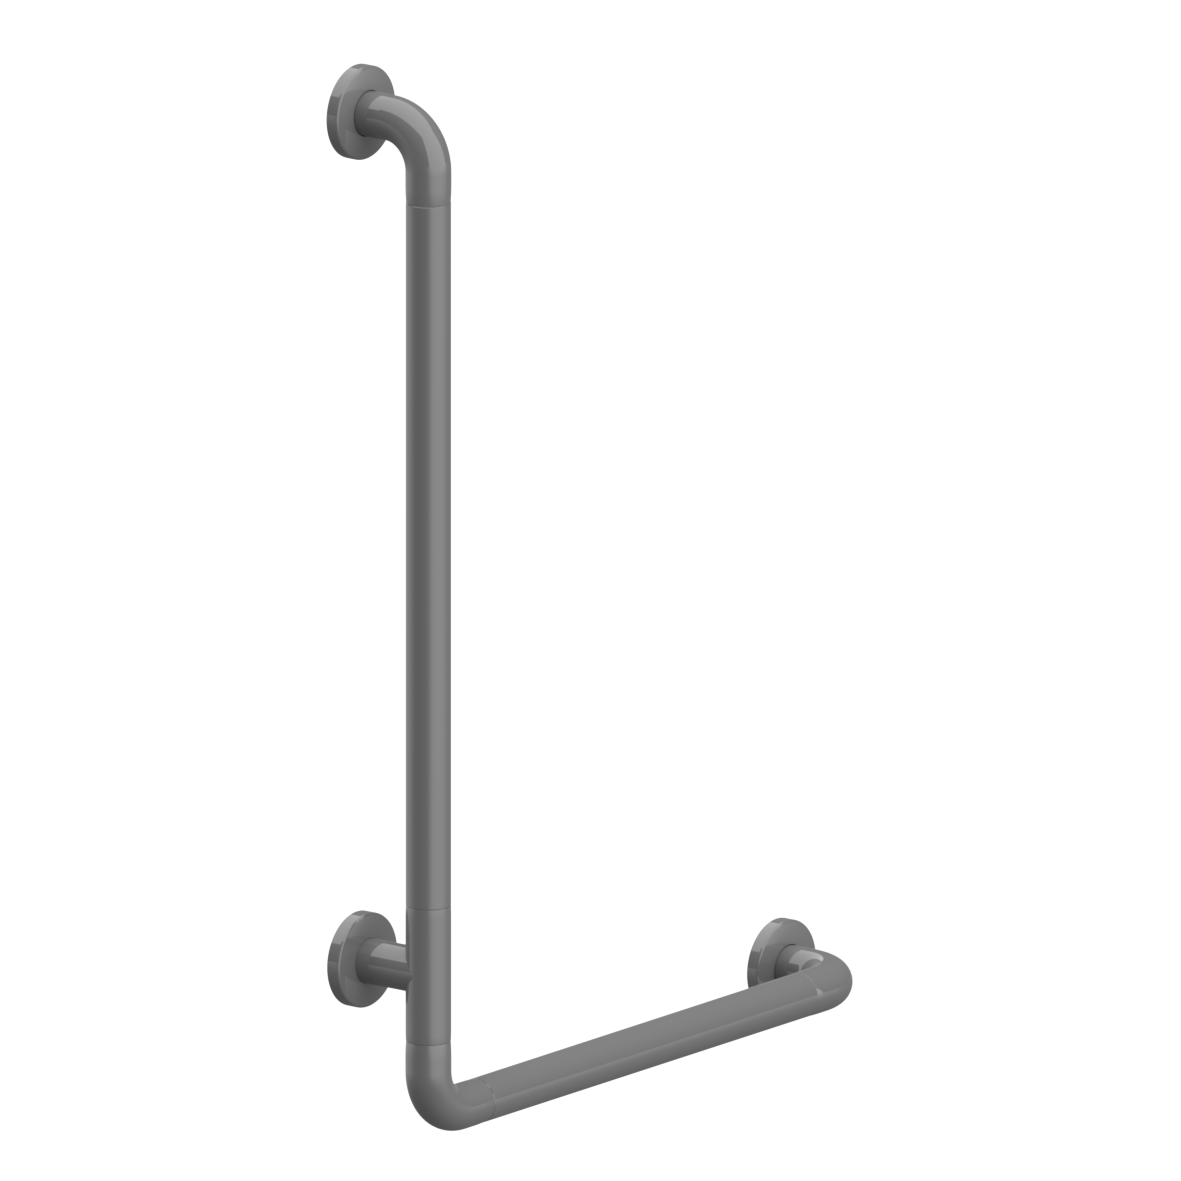 Special Care Adipositas Grab rail, 90°, left and right, 500 x 750 mm, Dark grey